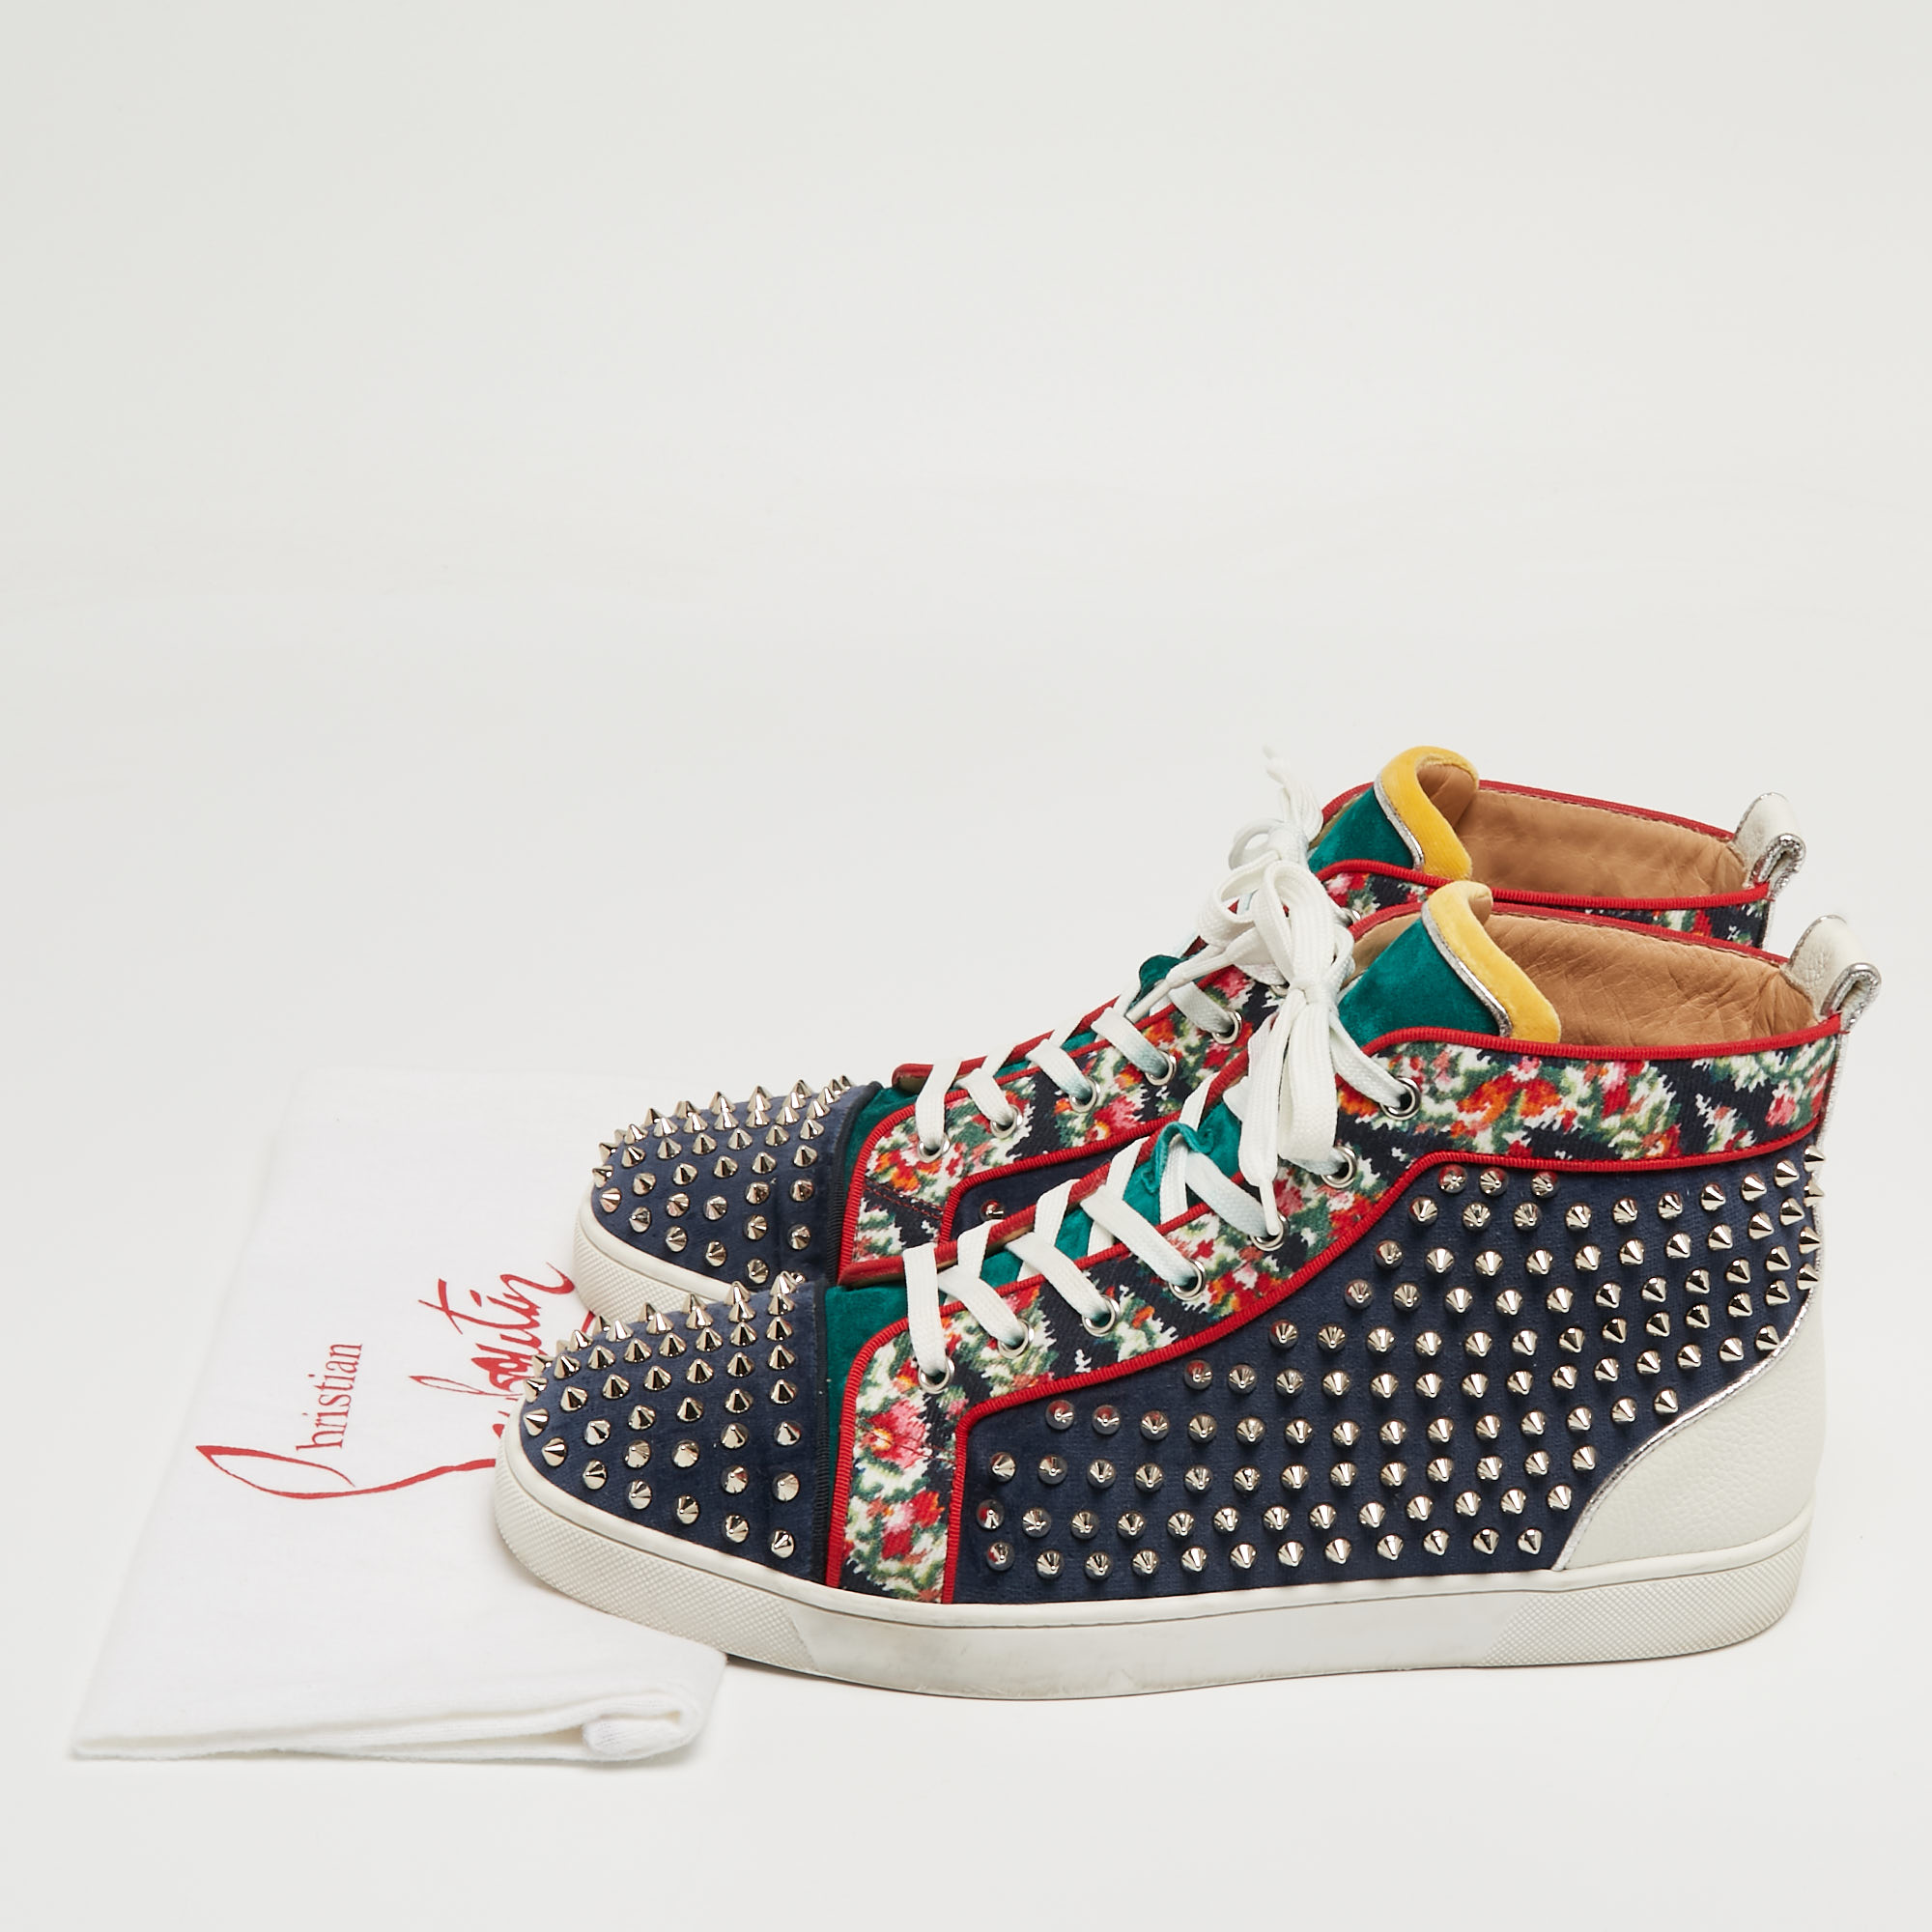 Christian Louboutin Tricolor Leather And Fabric Louis Spikes High-Top Sneakers Size 44.5